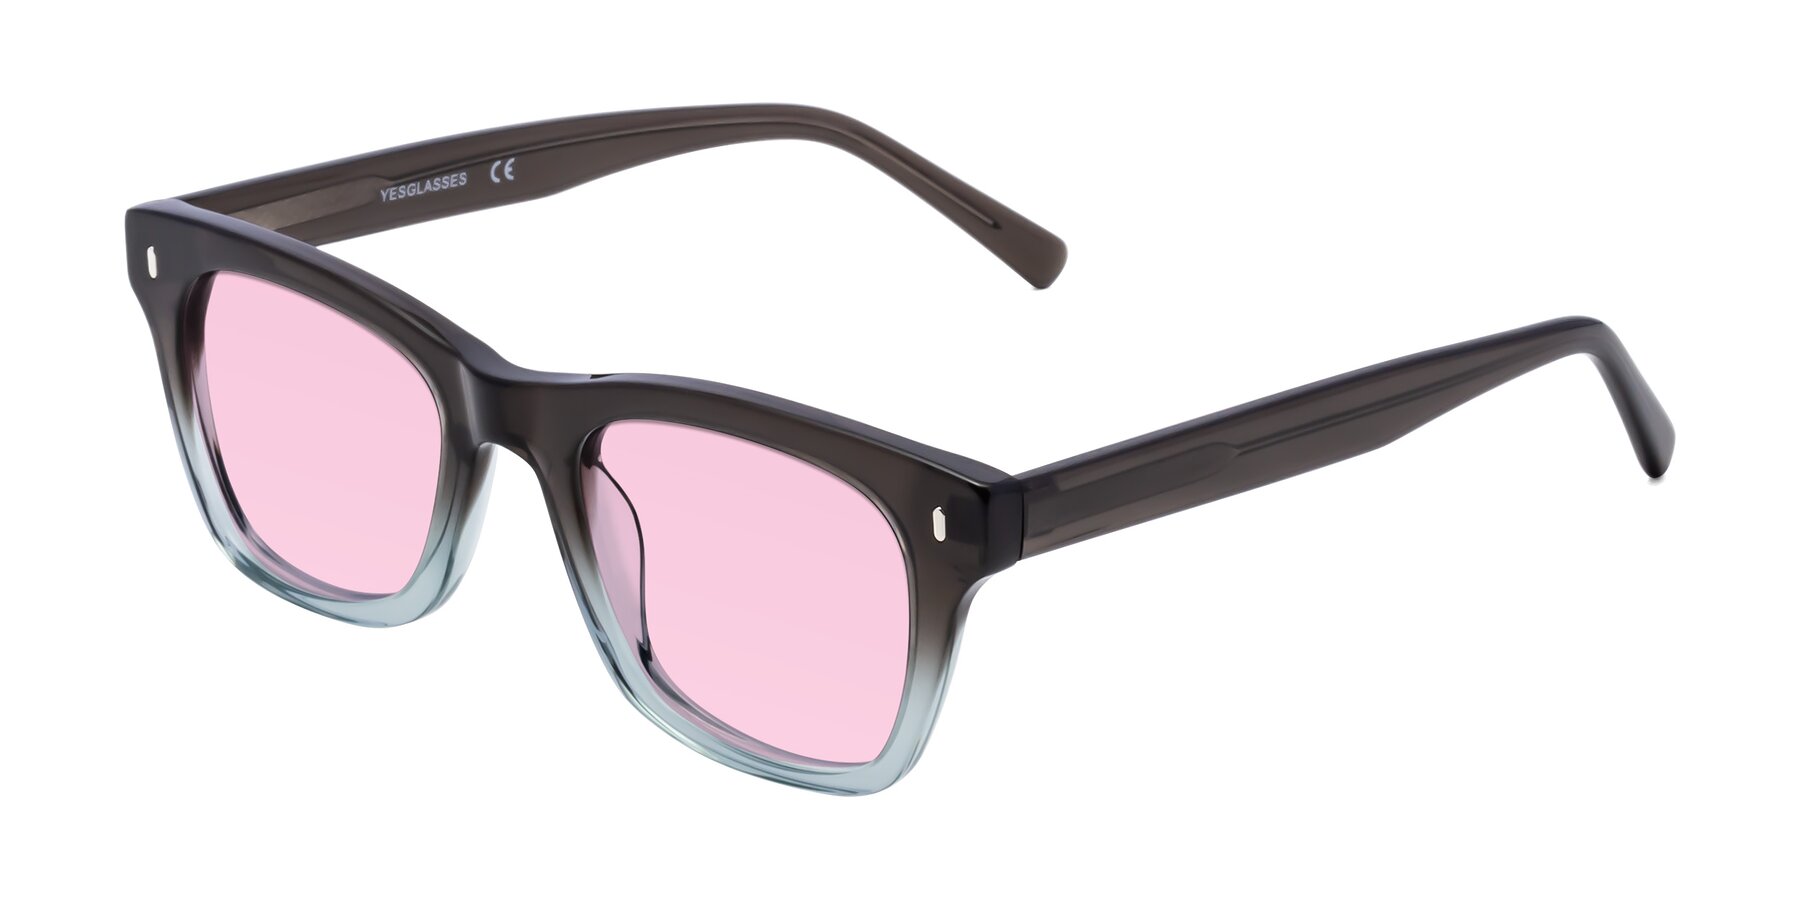 Angle of 17329 in Dark Brown with Light Pink Tinted Lenses